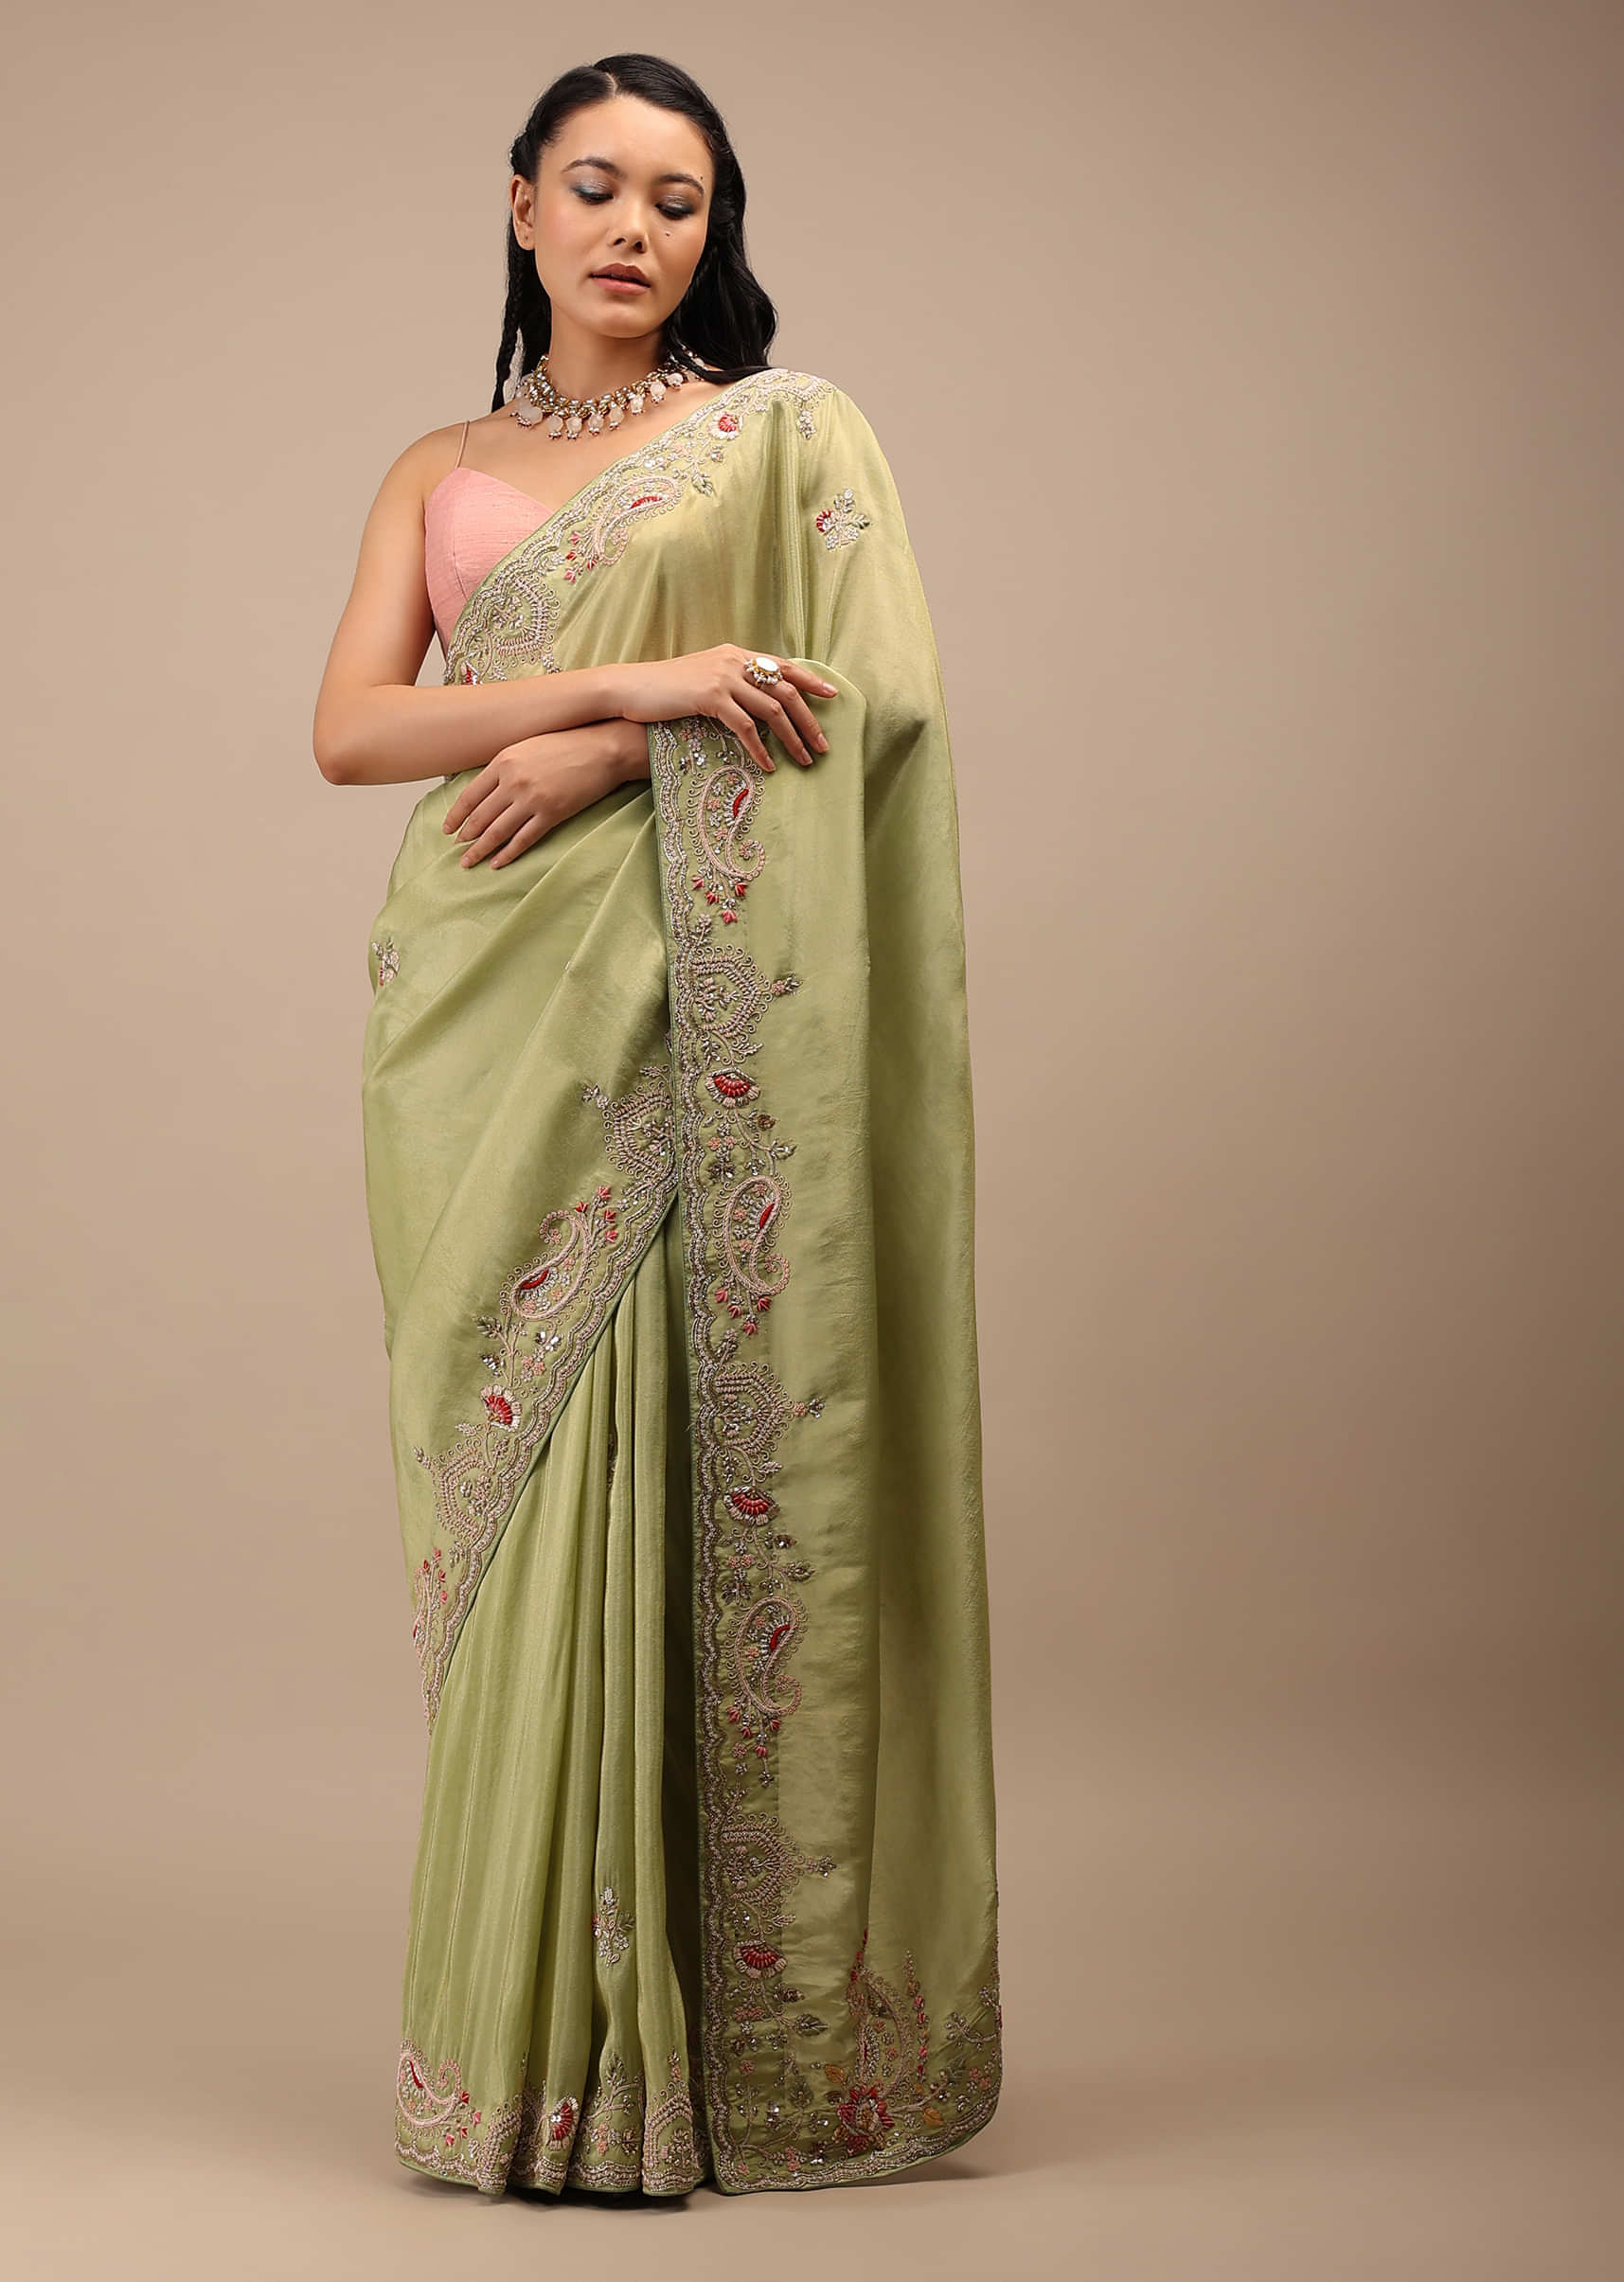 Beechnut Green Tissue Saree In Zardozi Embroidery Buttis, It Comes In An Embroidery Border In Multi-Color French Knots Detailing